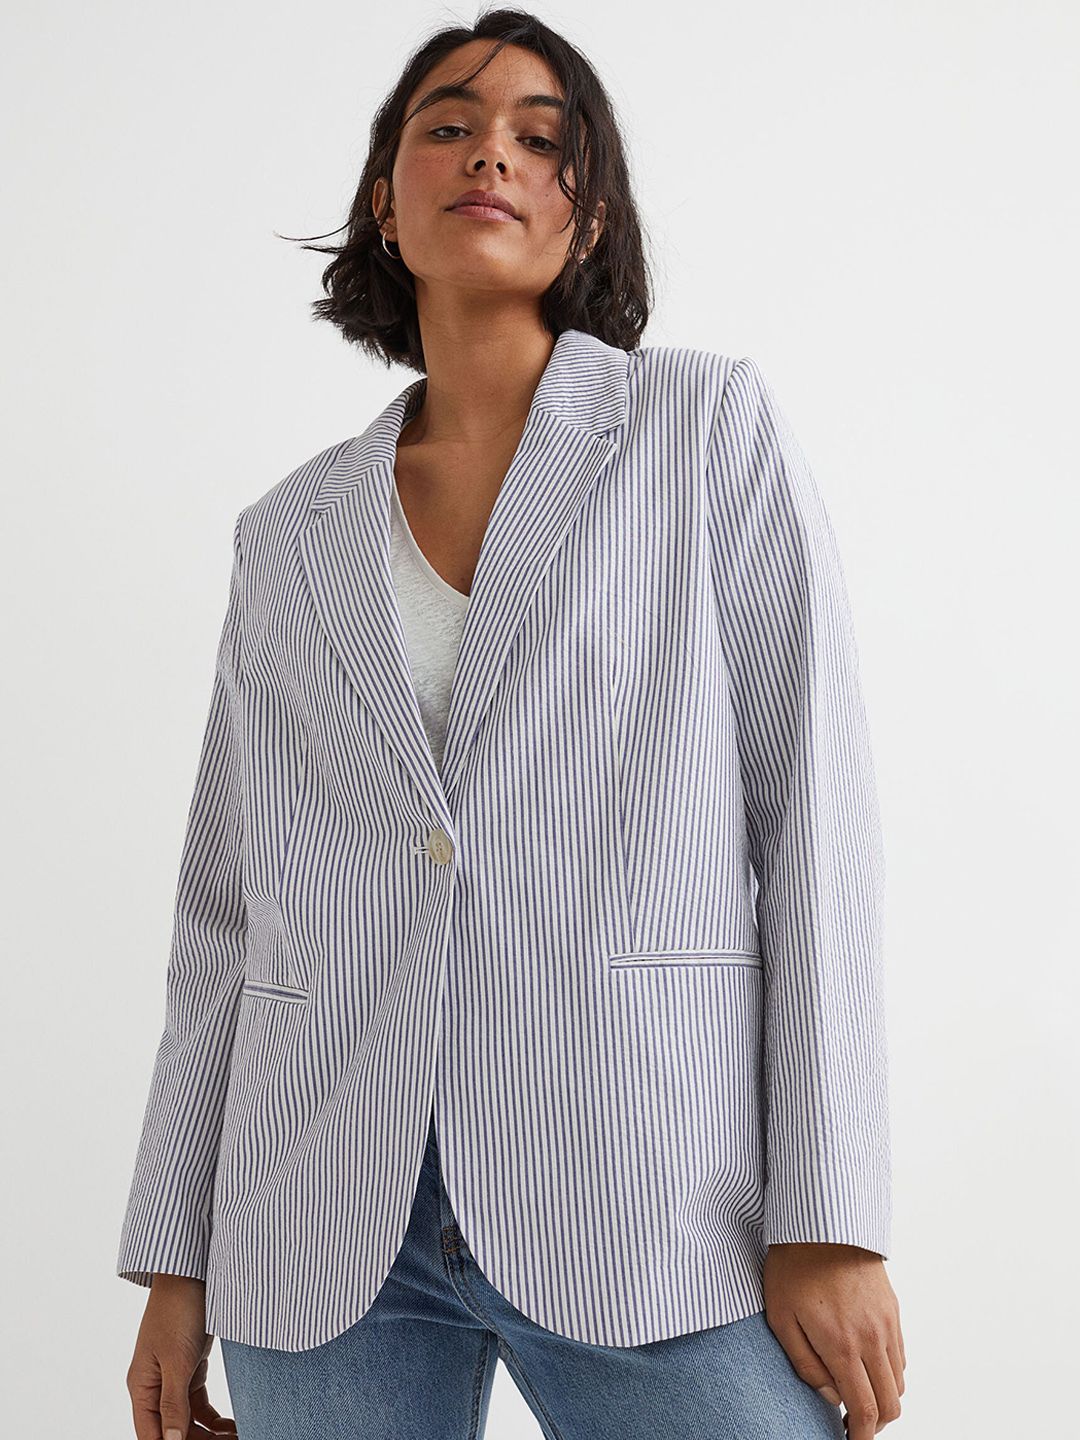 H&M Women Blue & White Pure Cotton Striped Single Breasted Jacket Price in India